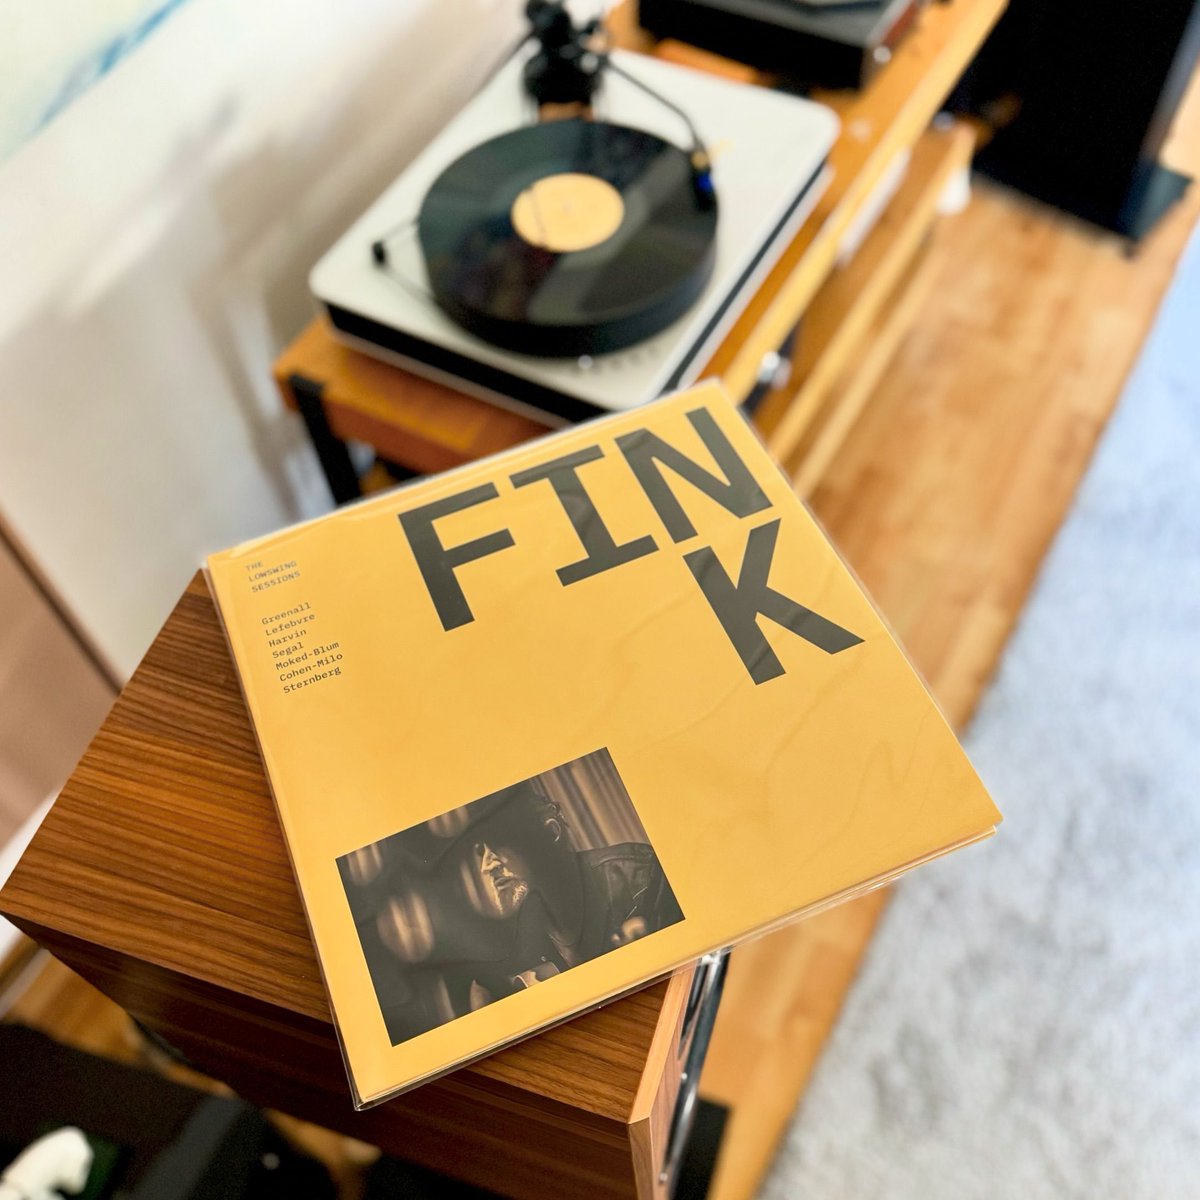 Spinning into the soulful depths with Fink's 'The LowSwing Sessions 2024'🎶✨ 

📸 ig: sound.in.grooves

#collectionvinyl #lovevinyl #vinylmusic #vinylcollectors #vinyllife #recordcollectionpost #recordlover #igvinyl #vinylrecords